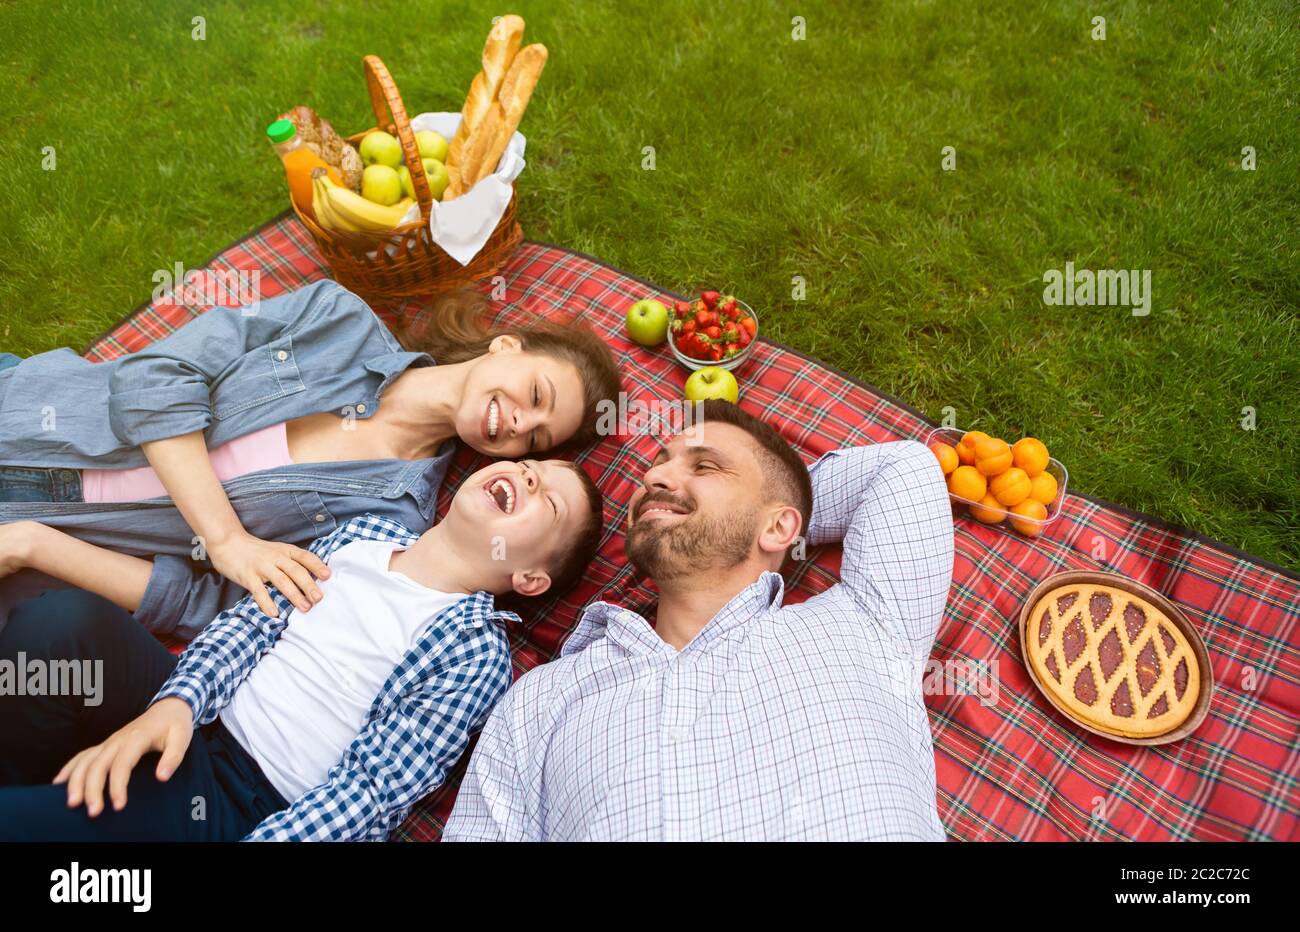 Family picnic fun. Above view of mom, dad and their son lying on checkered blanket outside Stock Photo